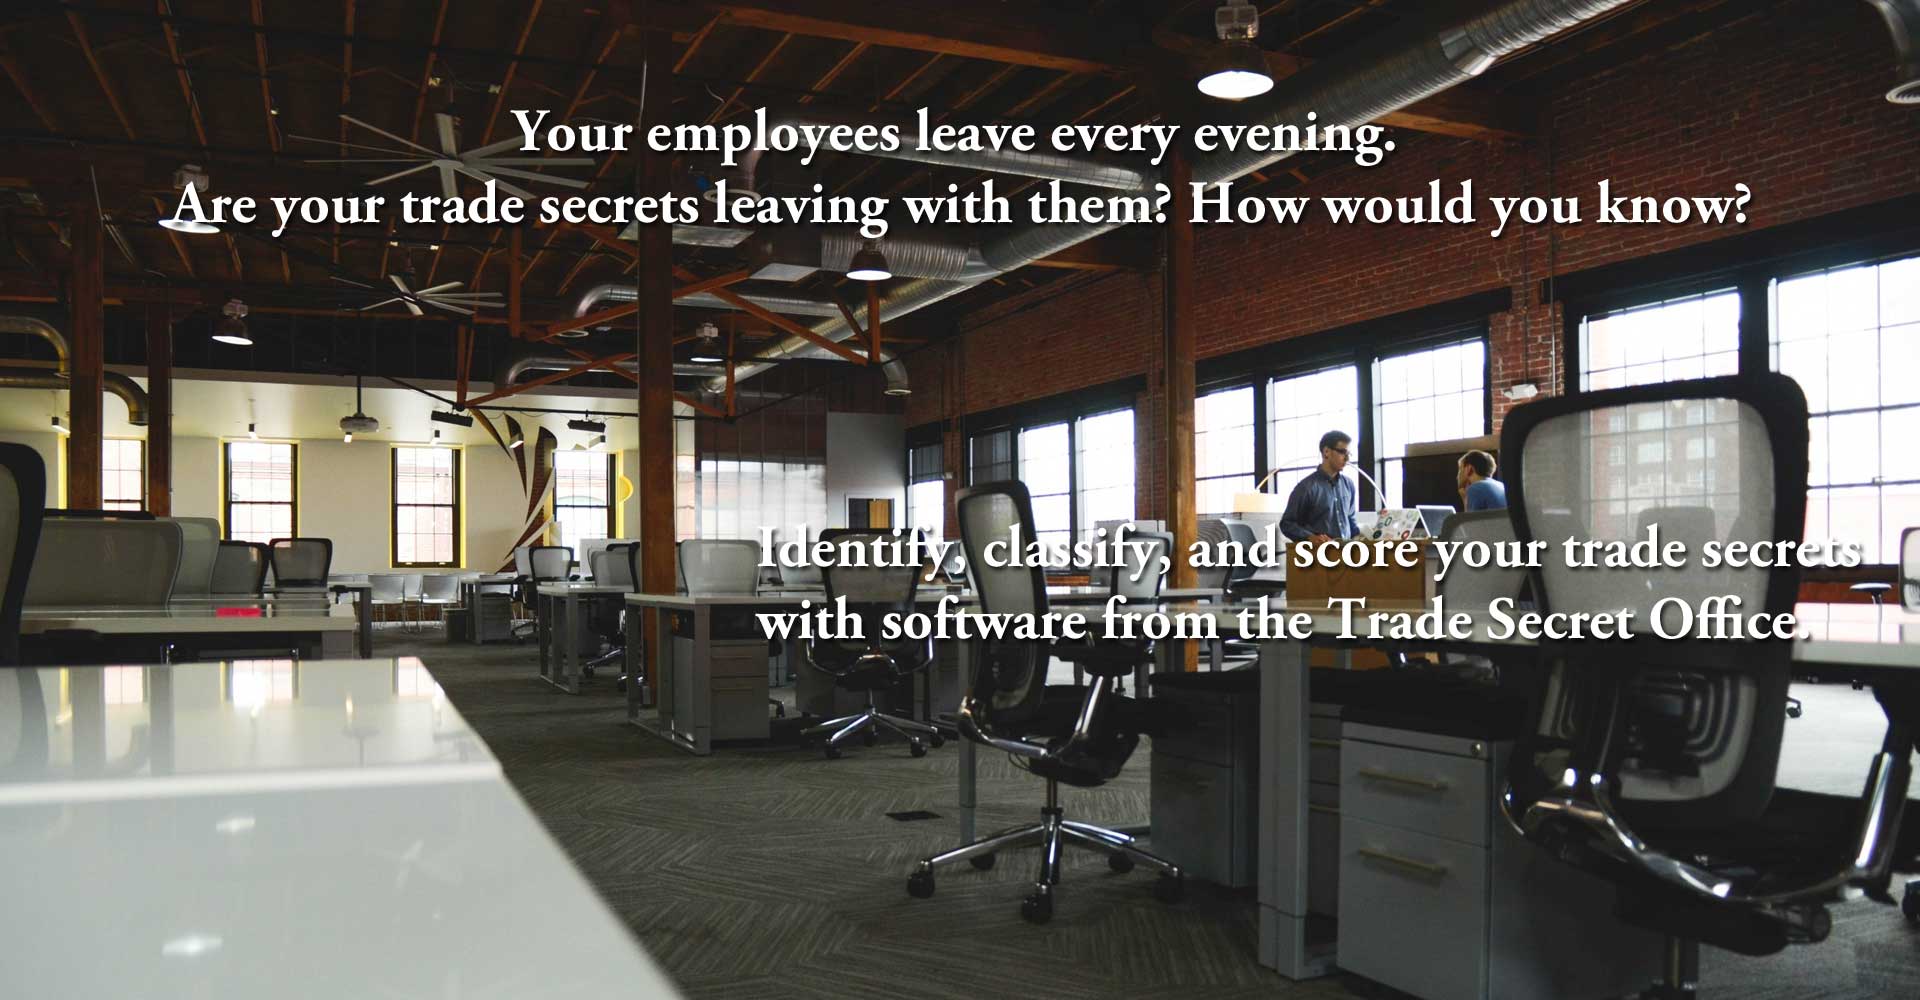 Your employees leave every evening. Are your trade secrets leaving with them? How would you know?